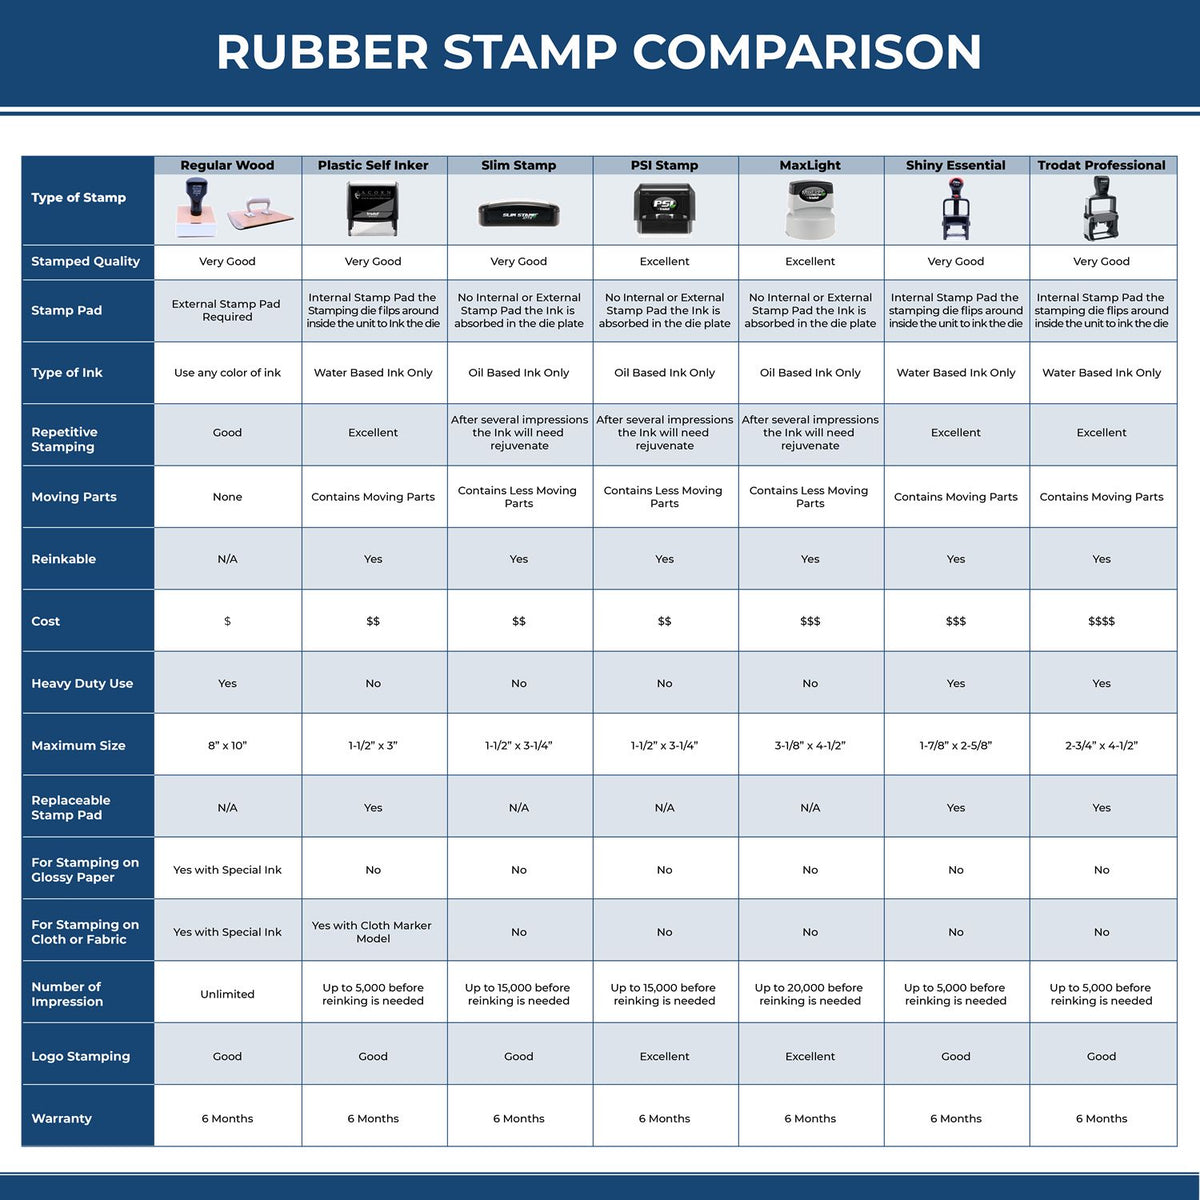 Large Self Inking Diabetic Stamp 4538S Rubber Stamp Comparison